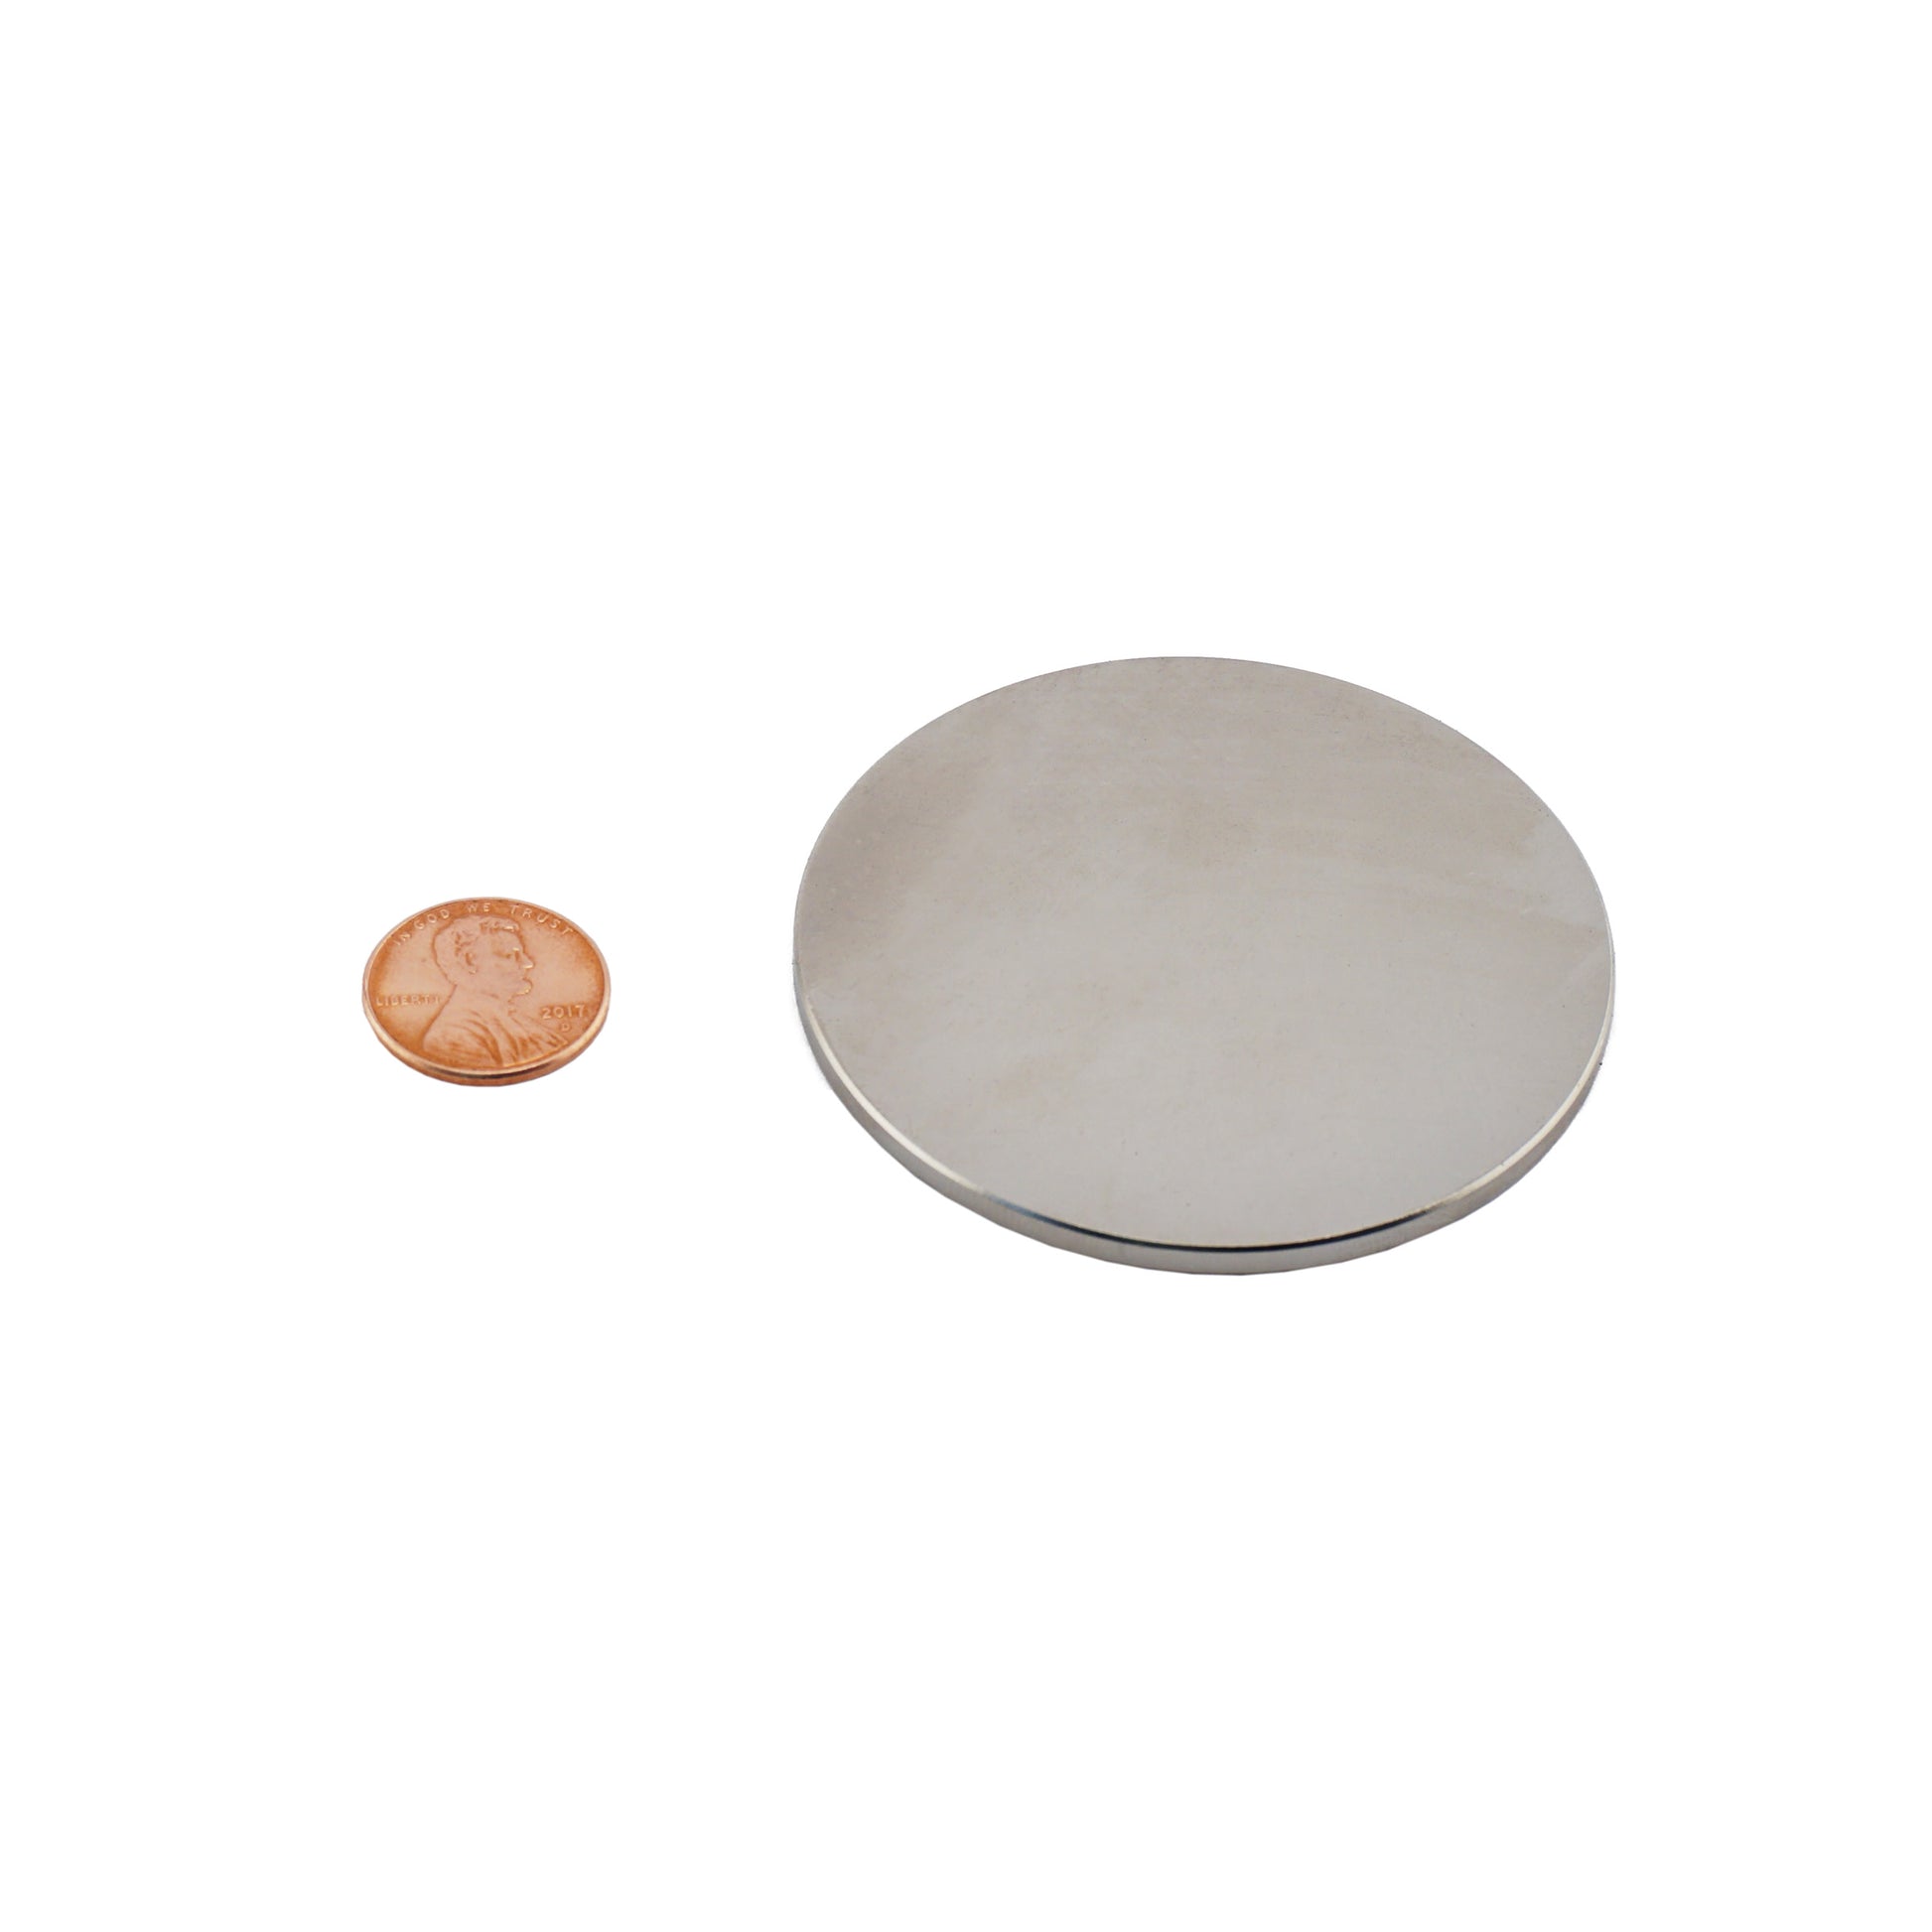 Load image into Gallery viewer, ND025002N Neodymium Disc Magnet - Compared to Penny for Size Reference